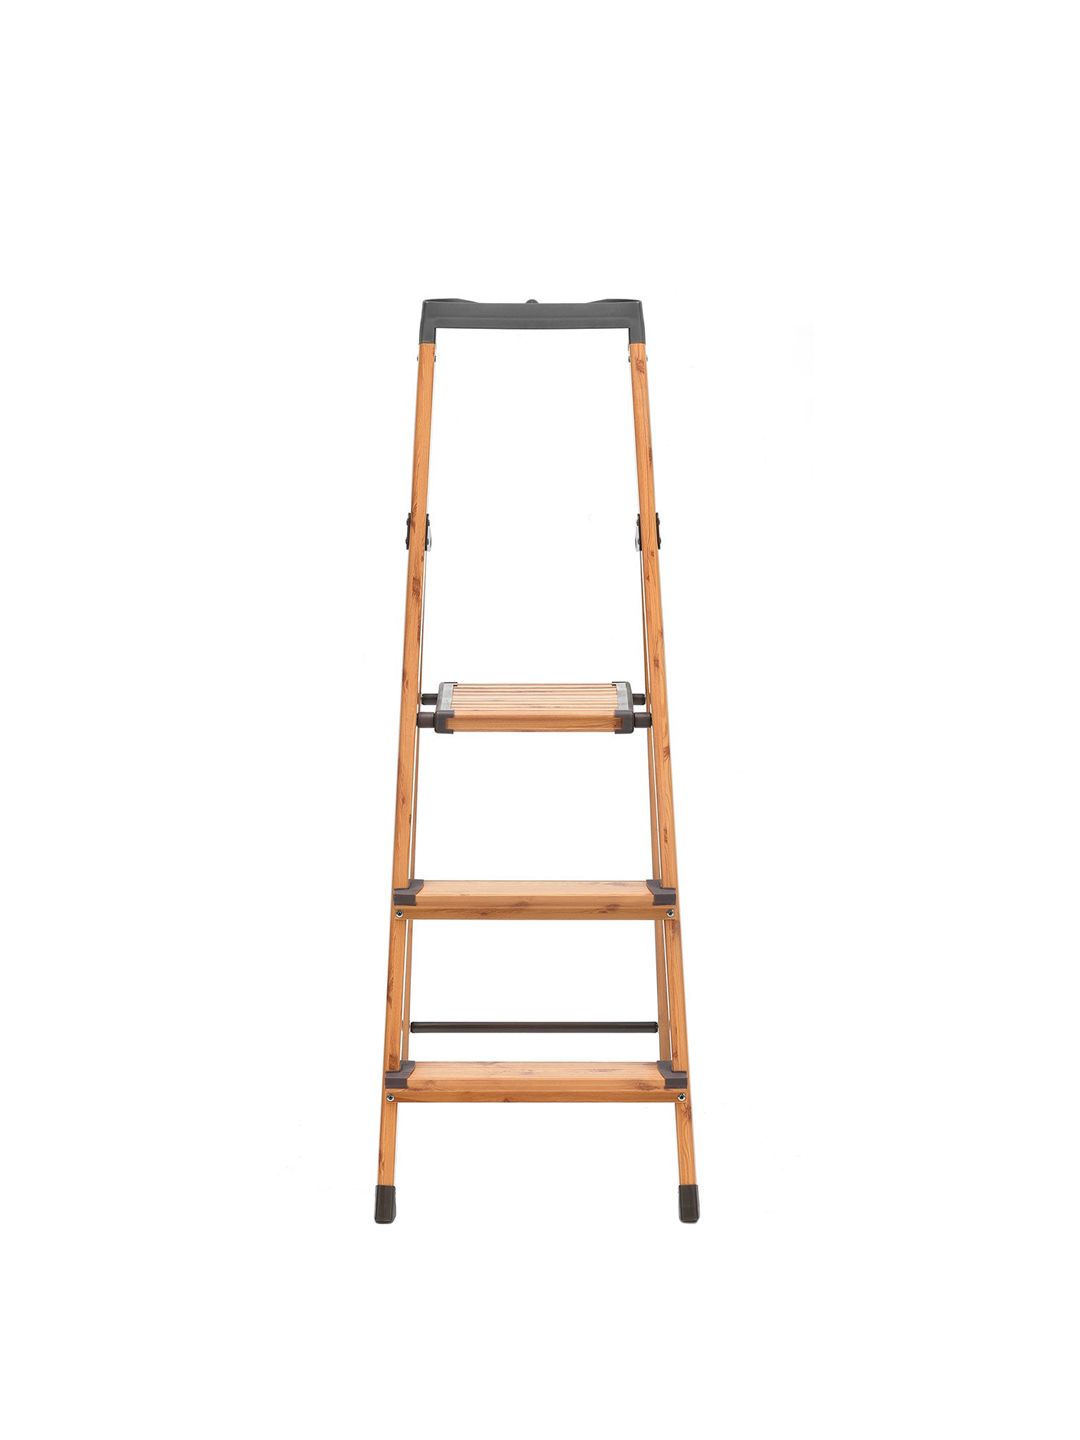 Athome by Nilkamal Brown 3 Steps Aluminum Step Ladder With Wooden Finish Price in India